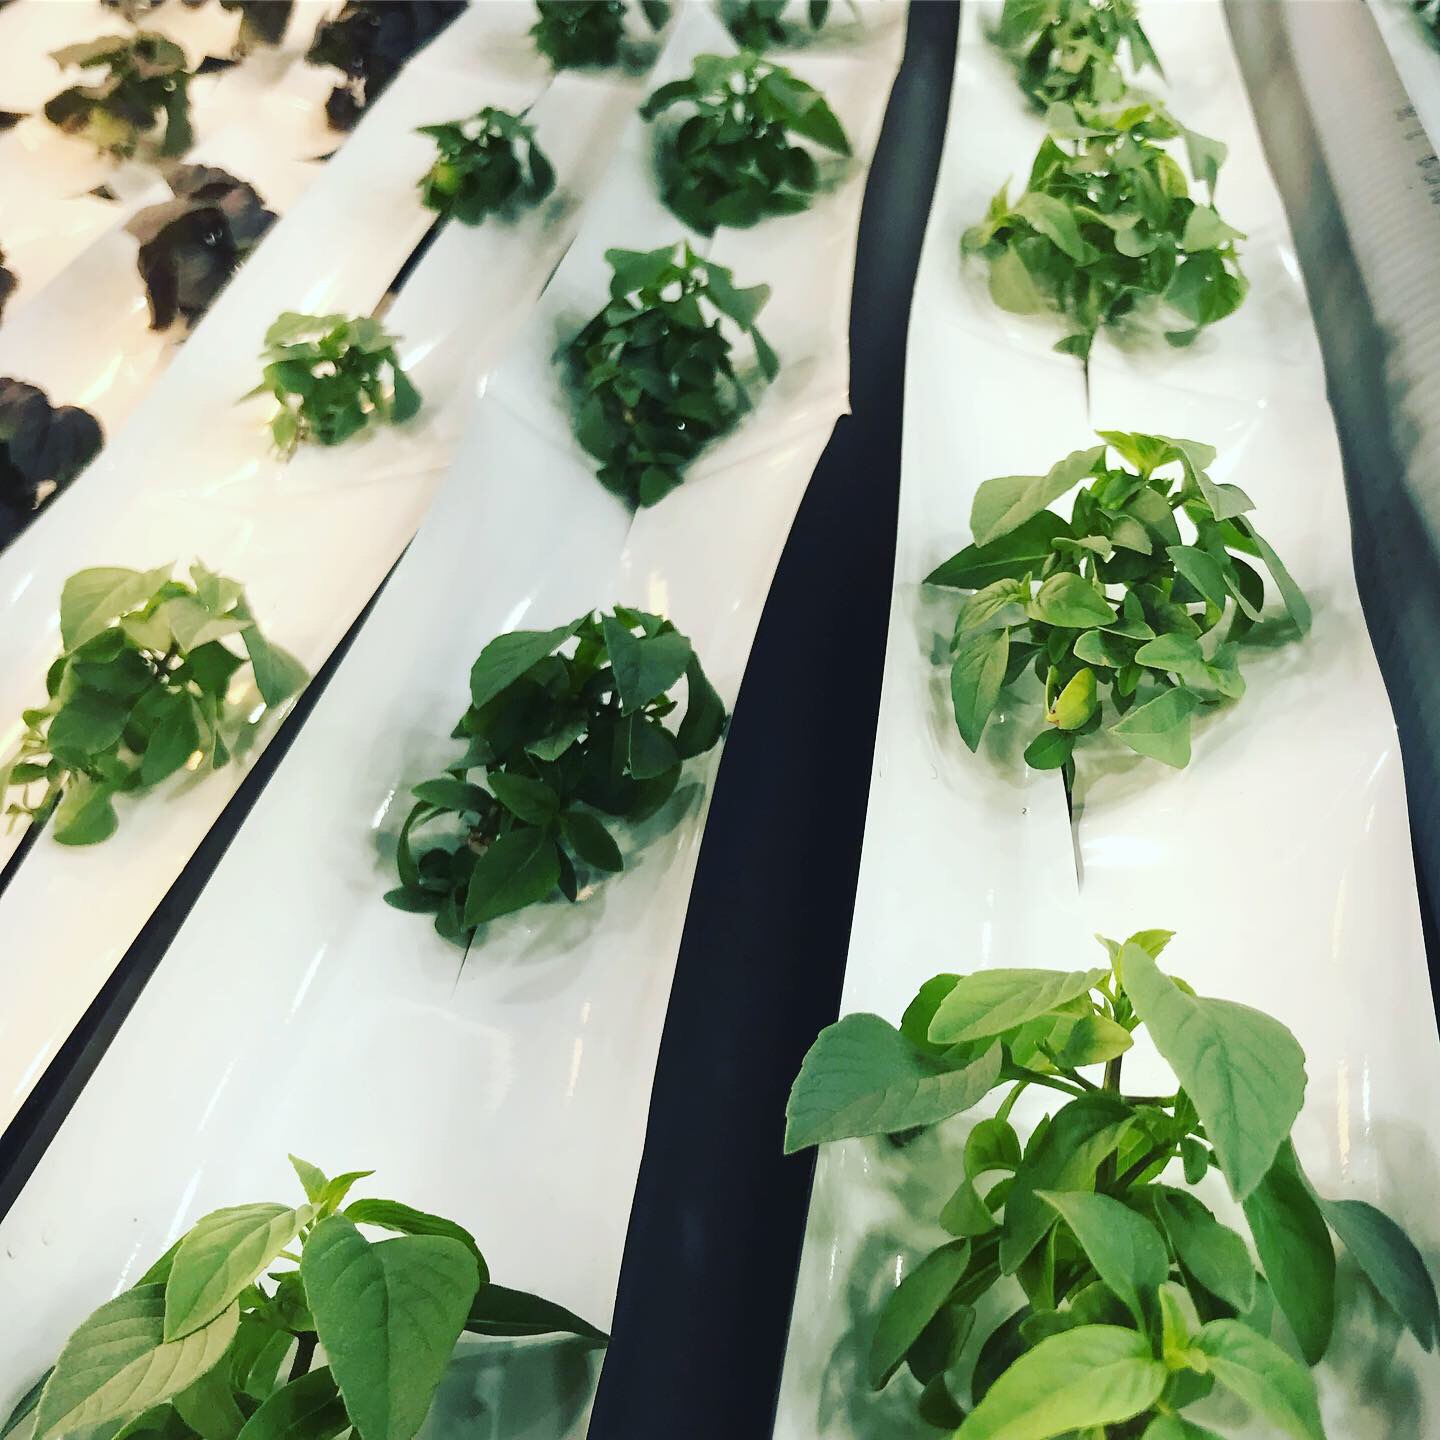 A Hydroponics Startup Growing Basil Is Their Own LED Technology —